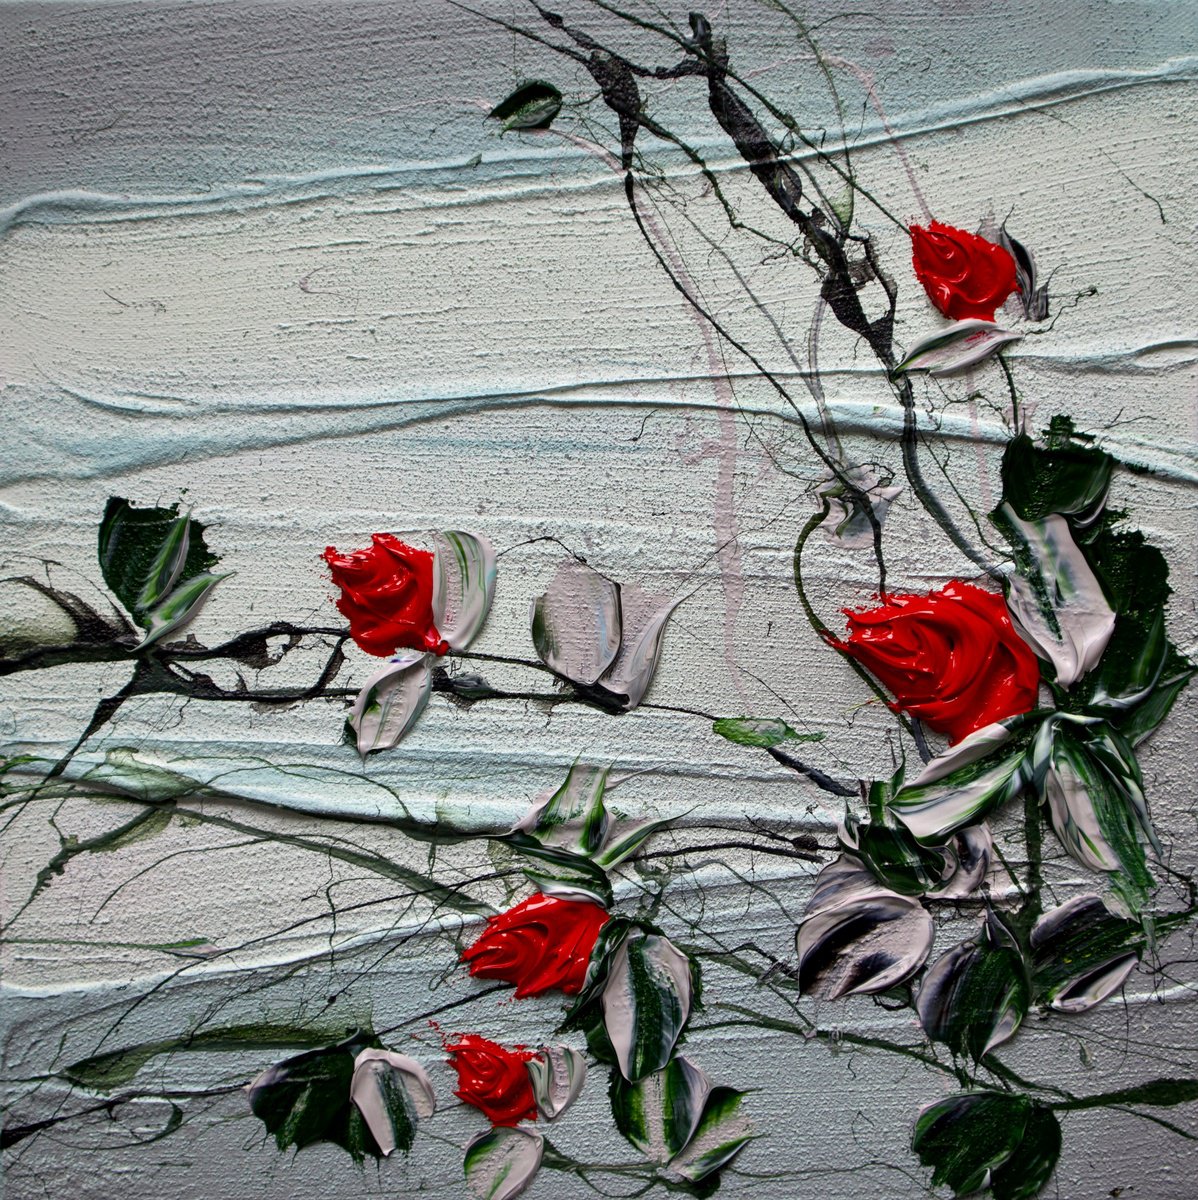 "Red Roses" Small floral art by Anastassia Skopp